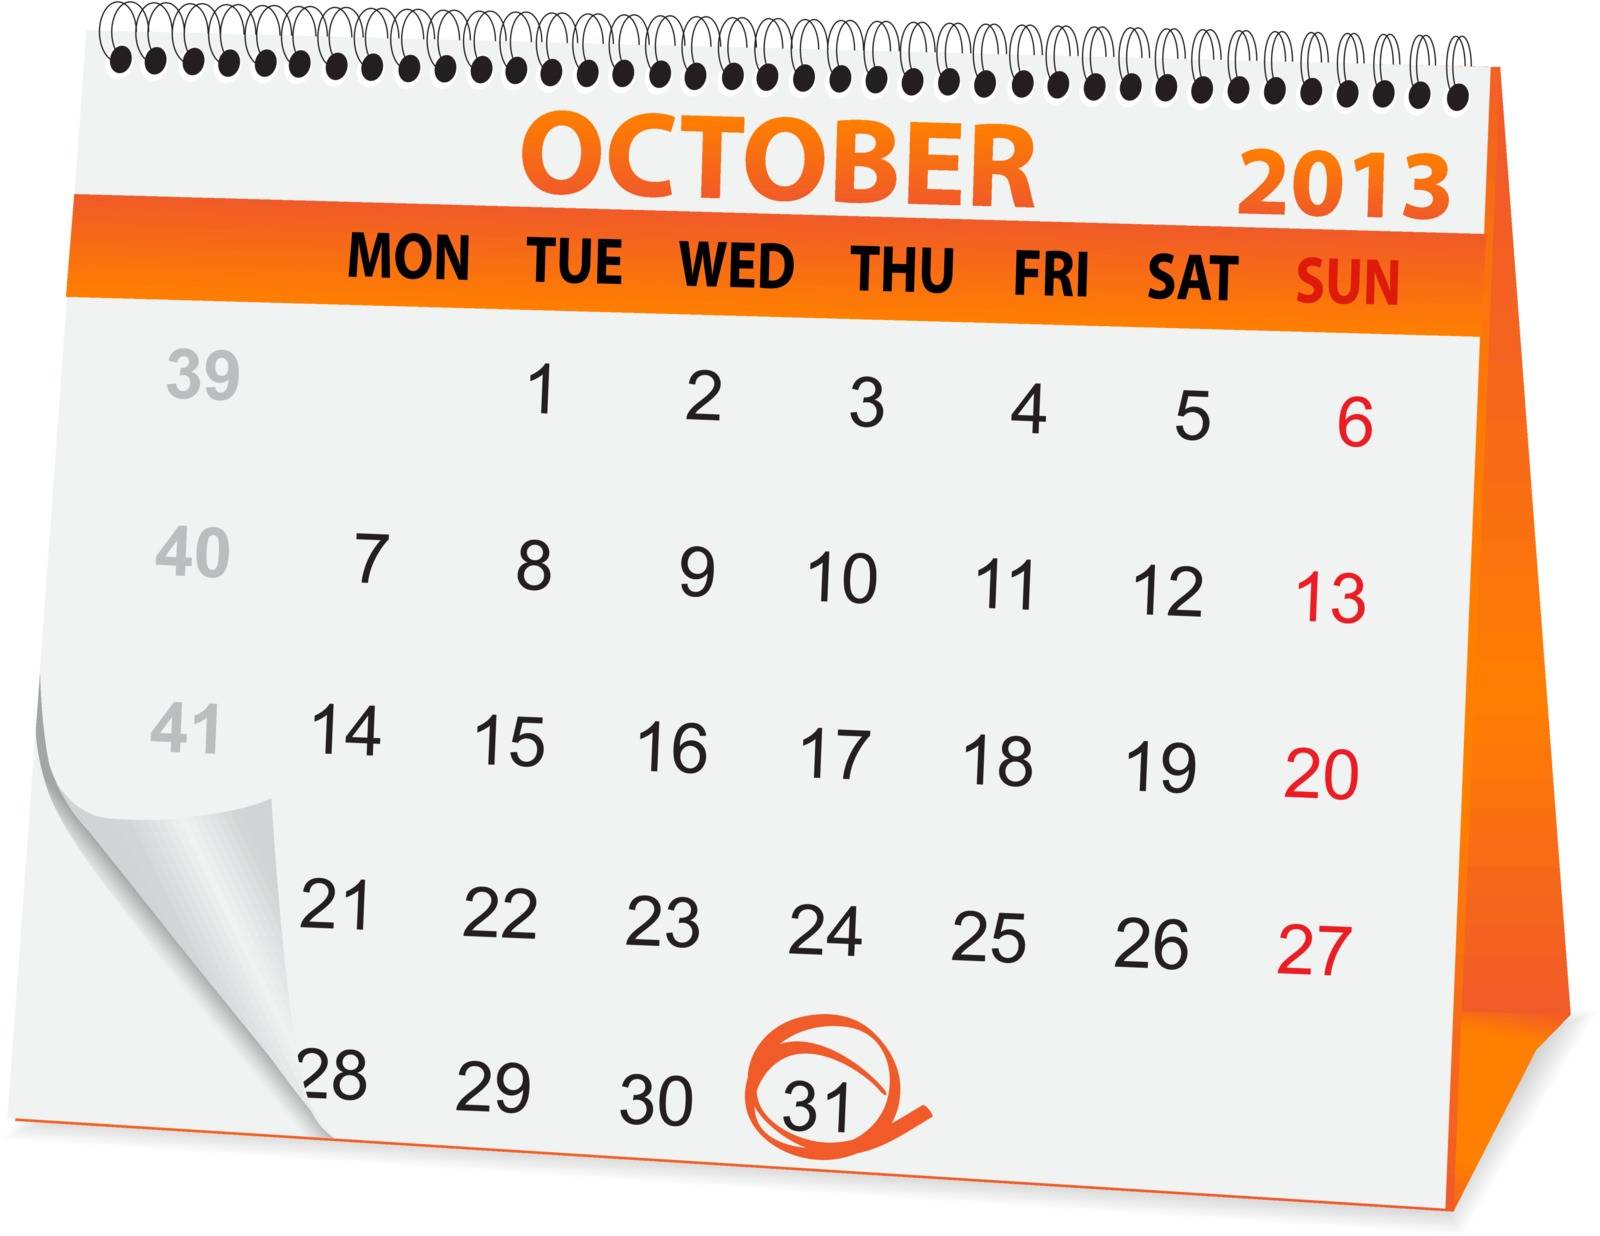 icon in the form of a calendar for Halloween